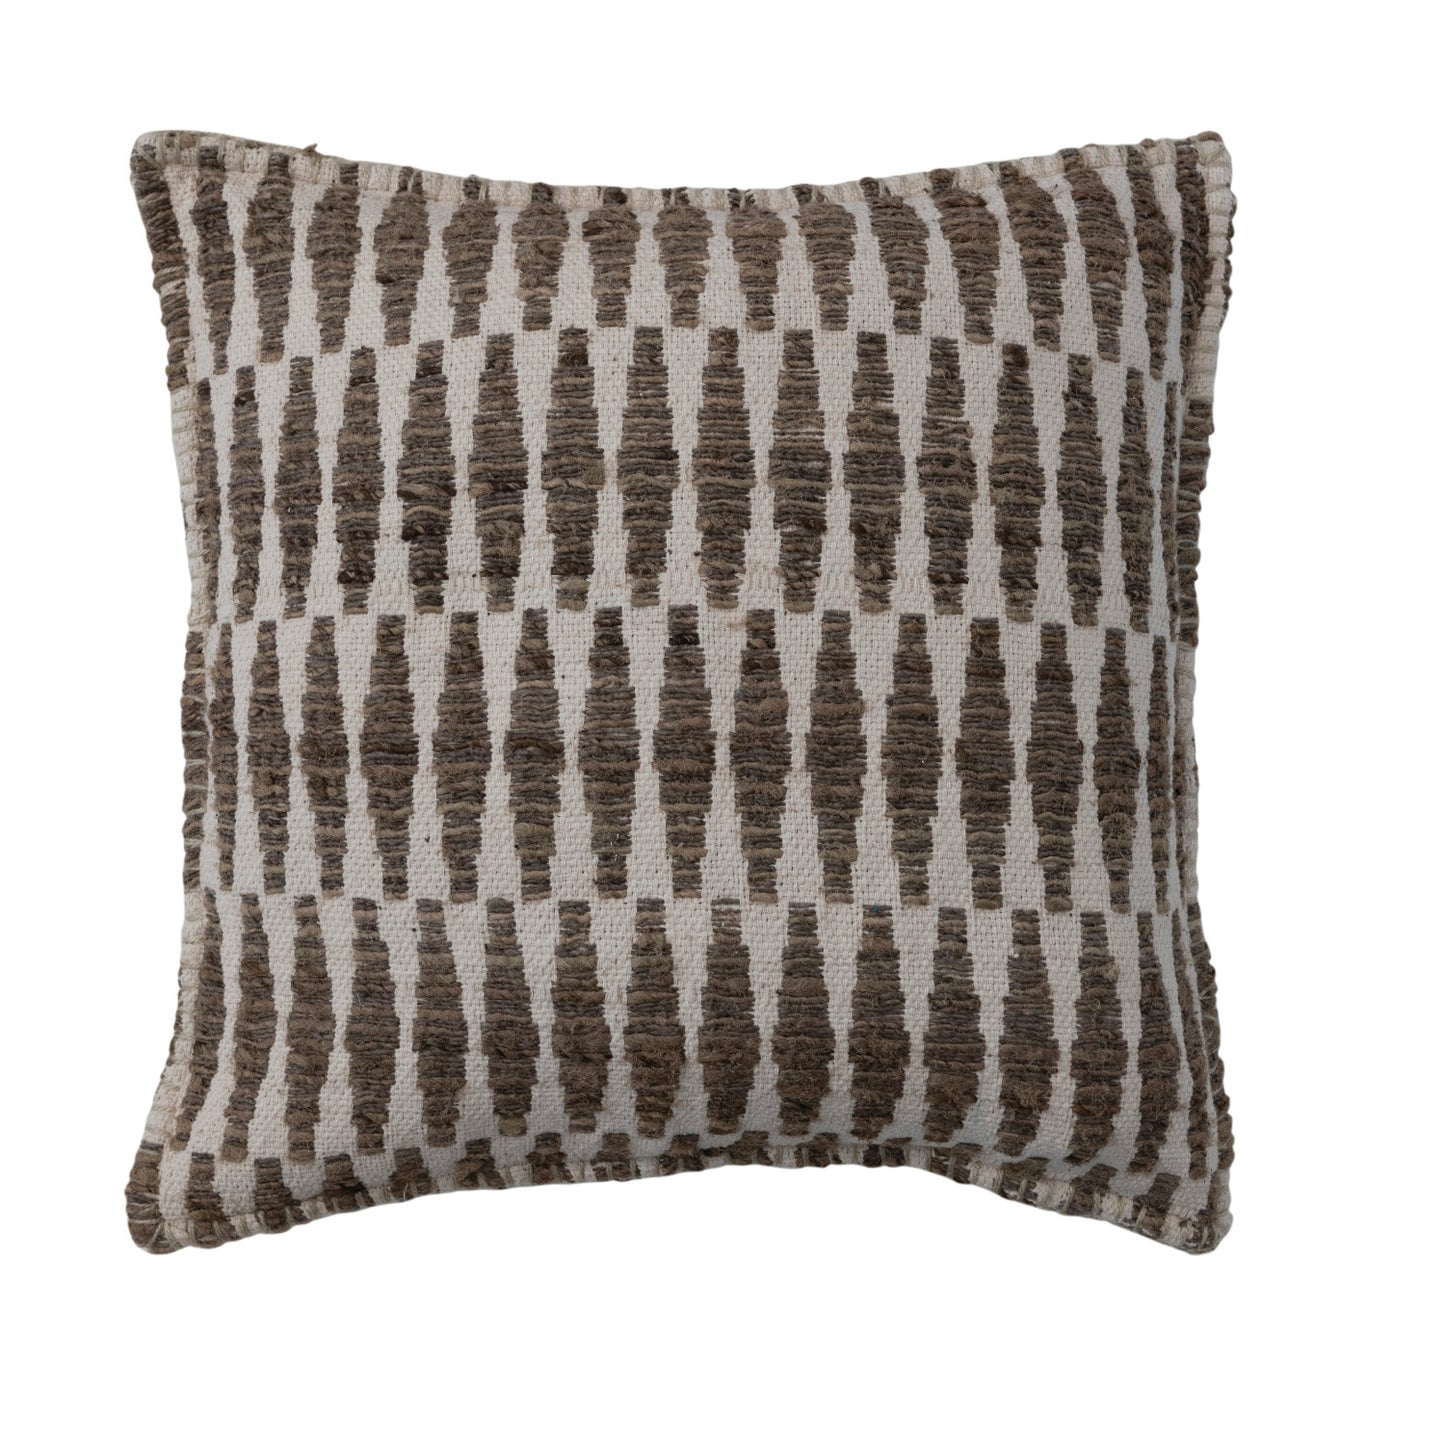 Hand-Woven Recycled Cotton Pillow, Blanket Stitch & Chambray Back, Polyester Fill